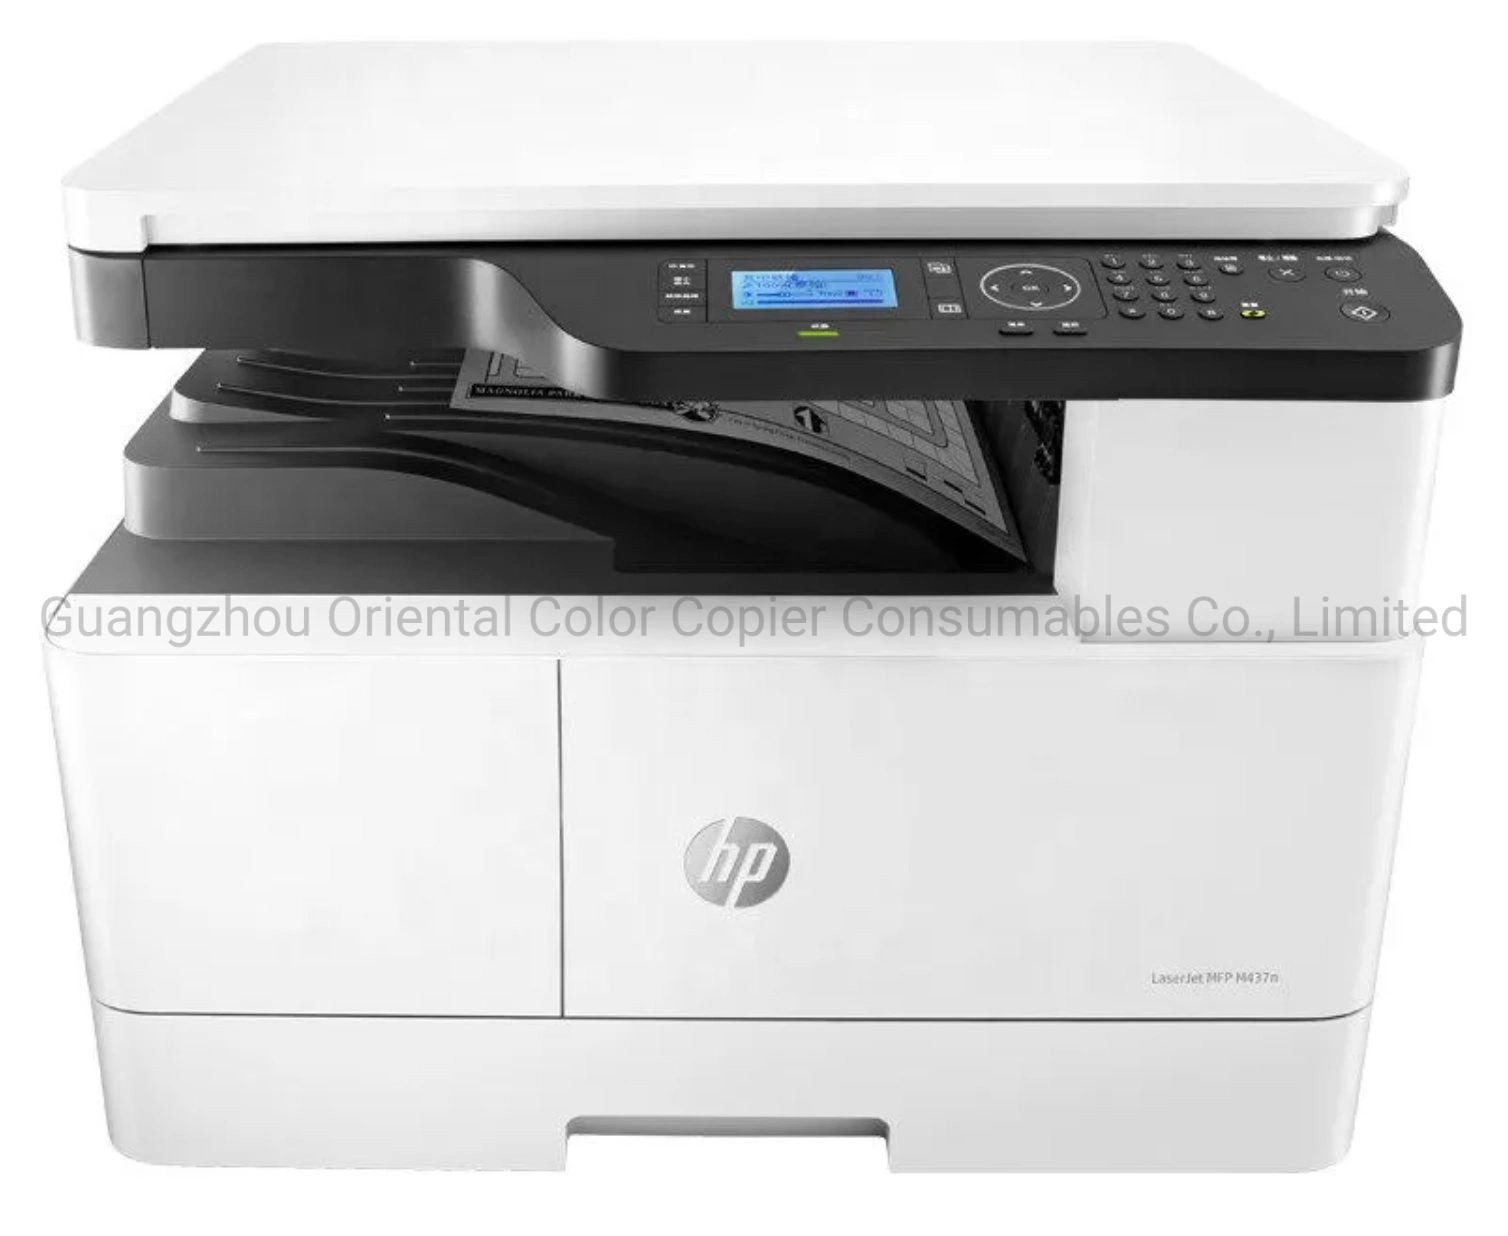 HP Machine M437n Black and White Laser A3 Printer Copying All-in-One Machine Office Network